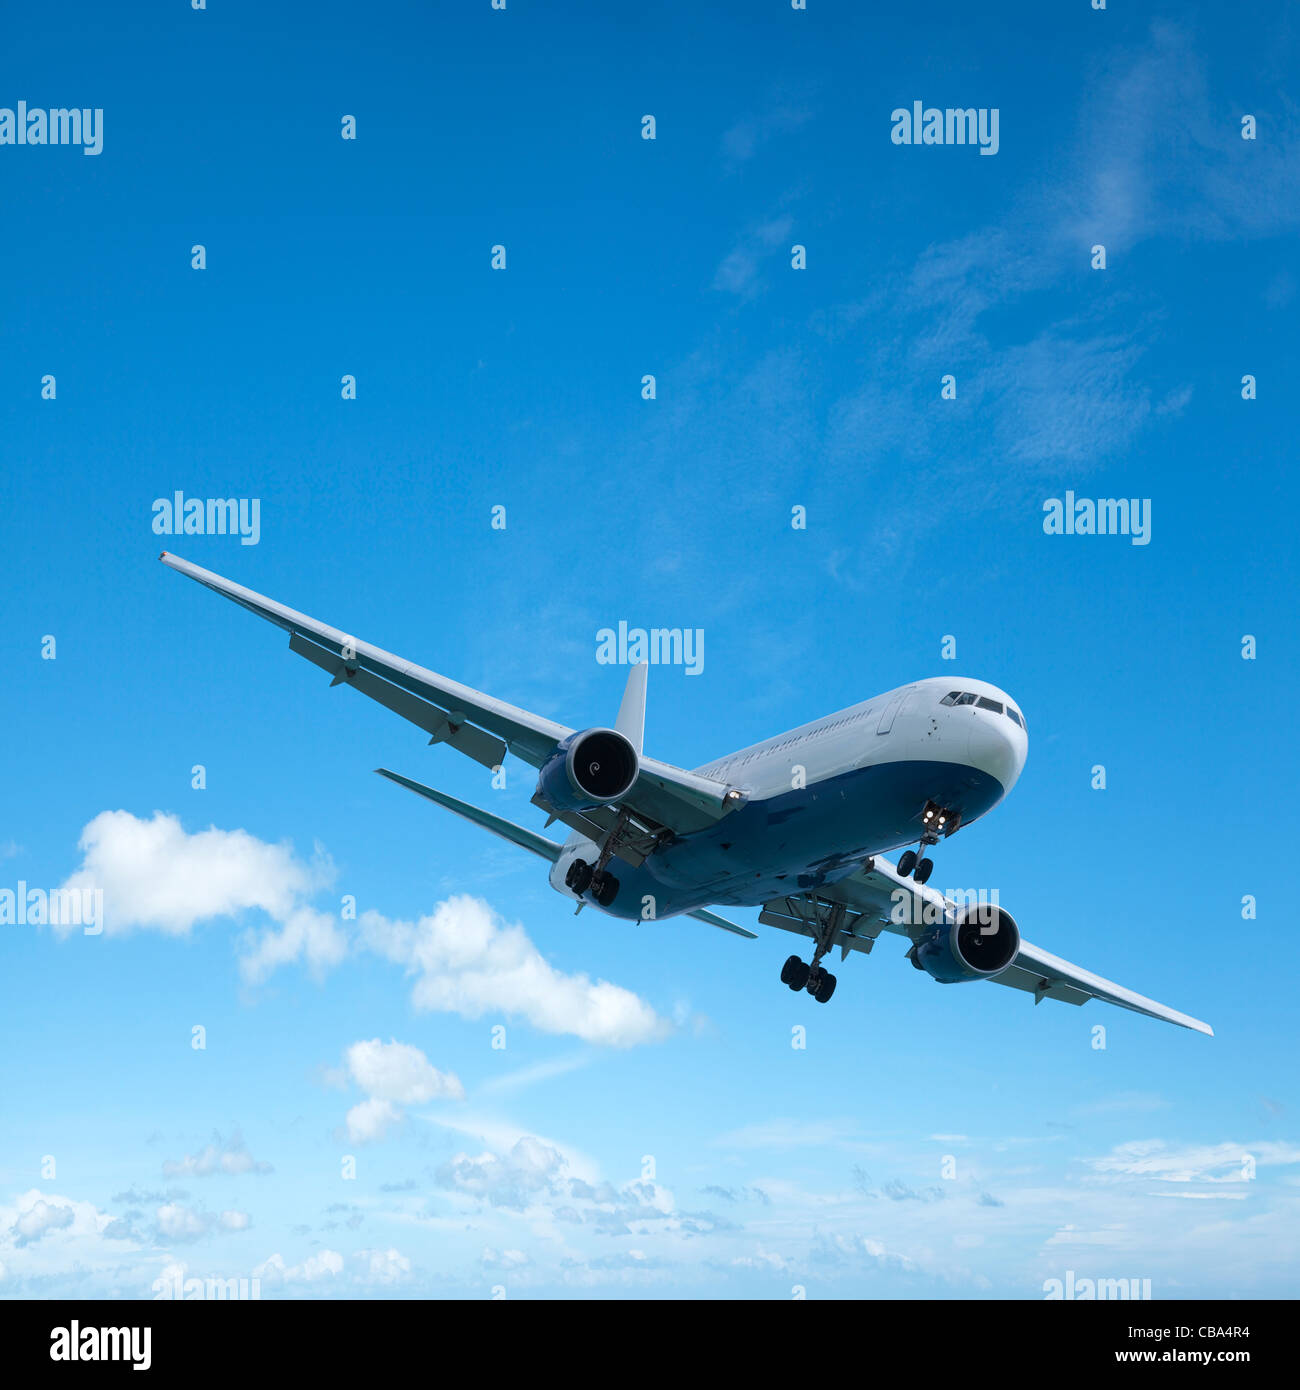 Jet aircraft is maneuvering for landing. Square composition with a lot of copy space.  Stock Photo